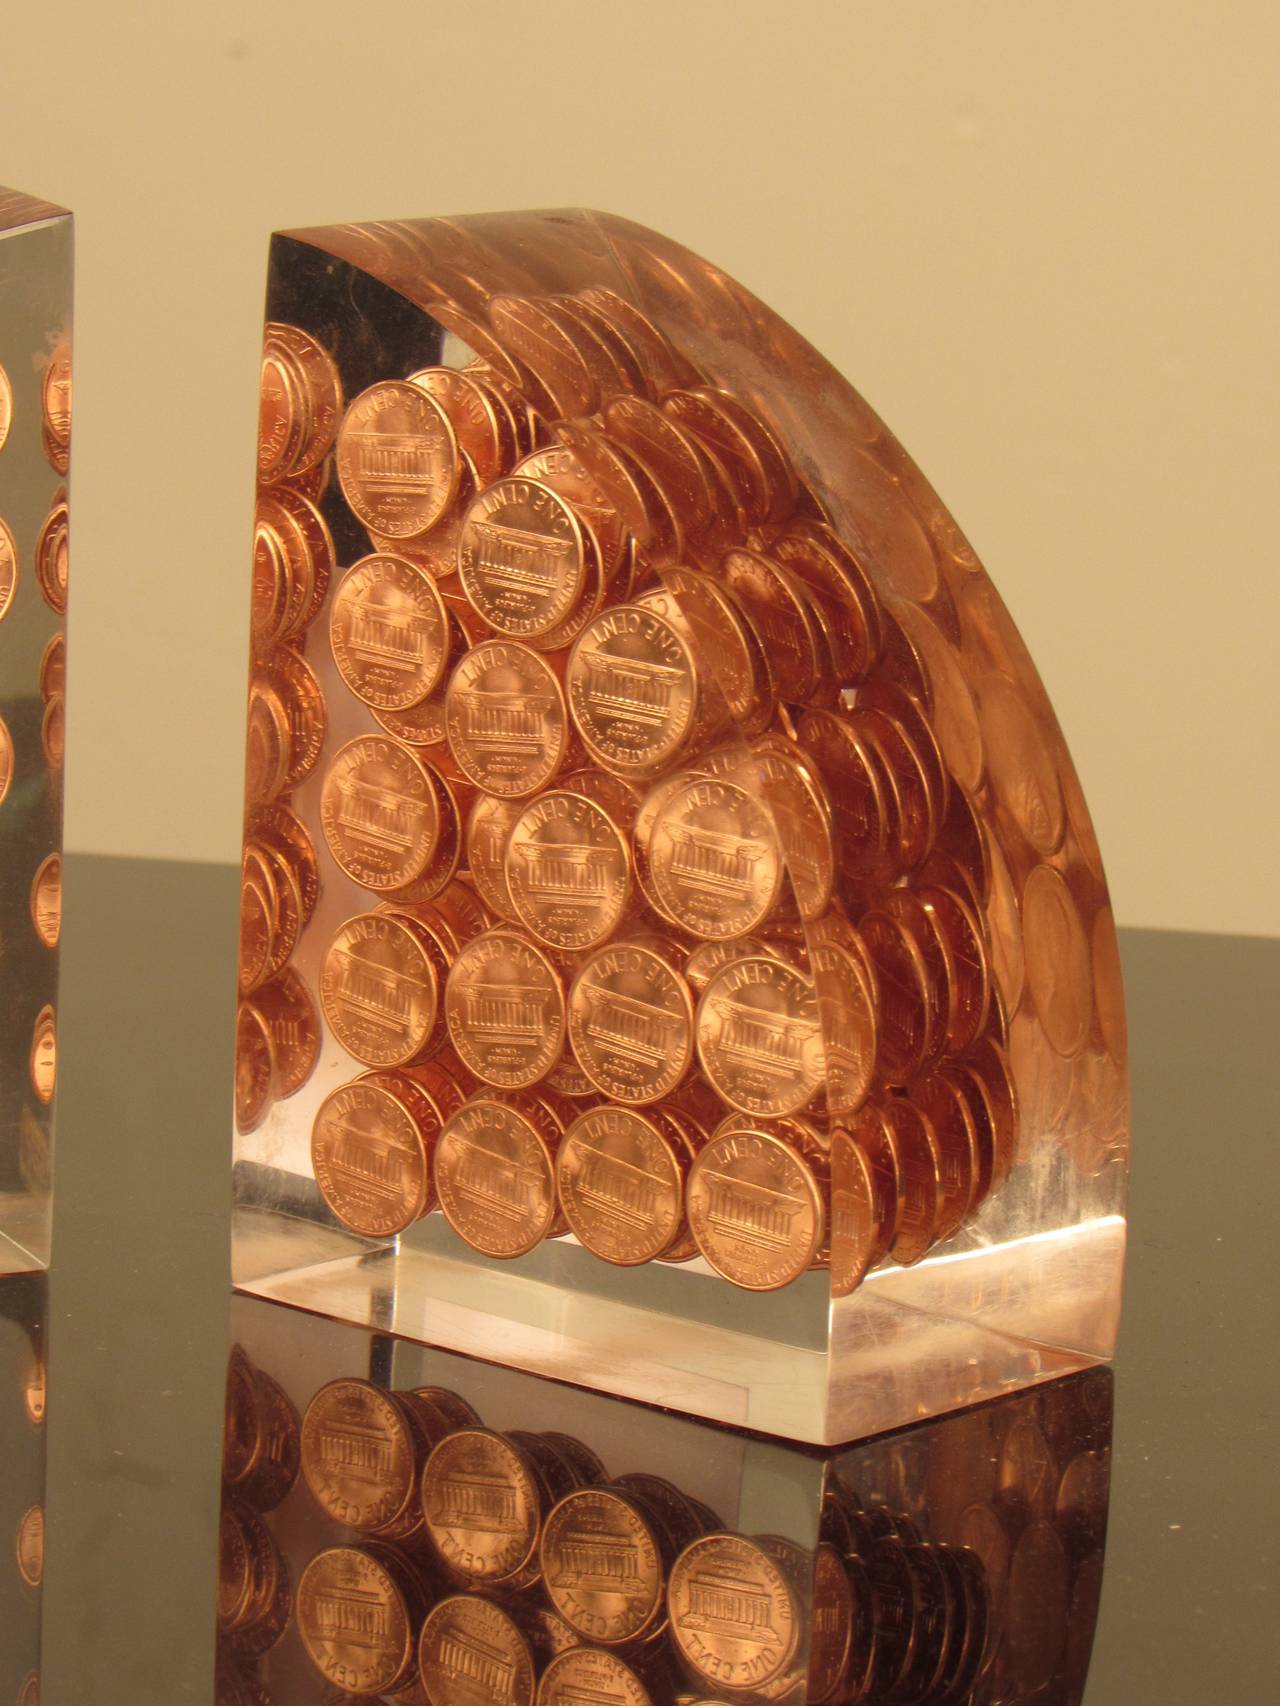 American Gleaming Lucite Demi-lune Bookends with Suspended Pennies